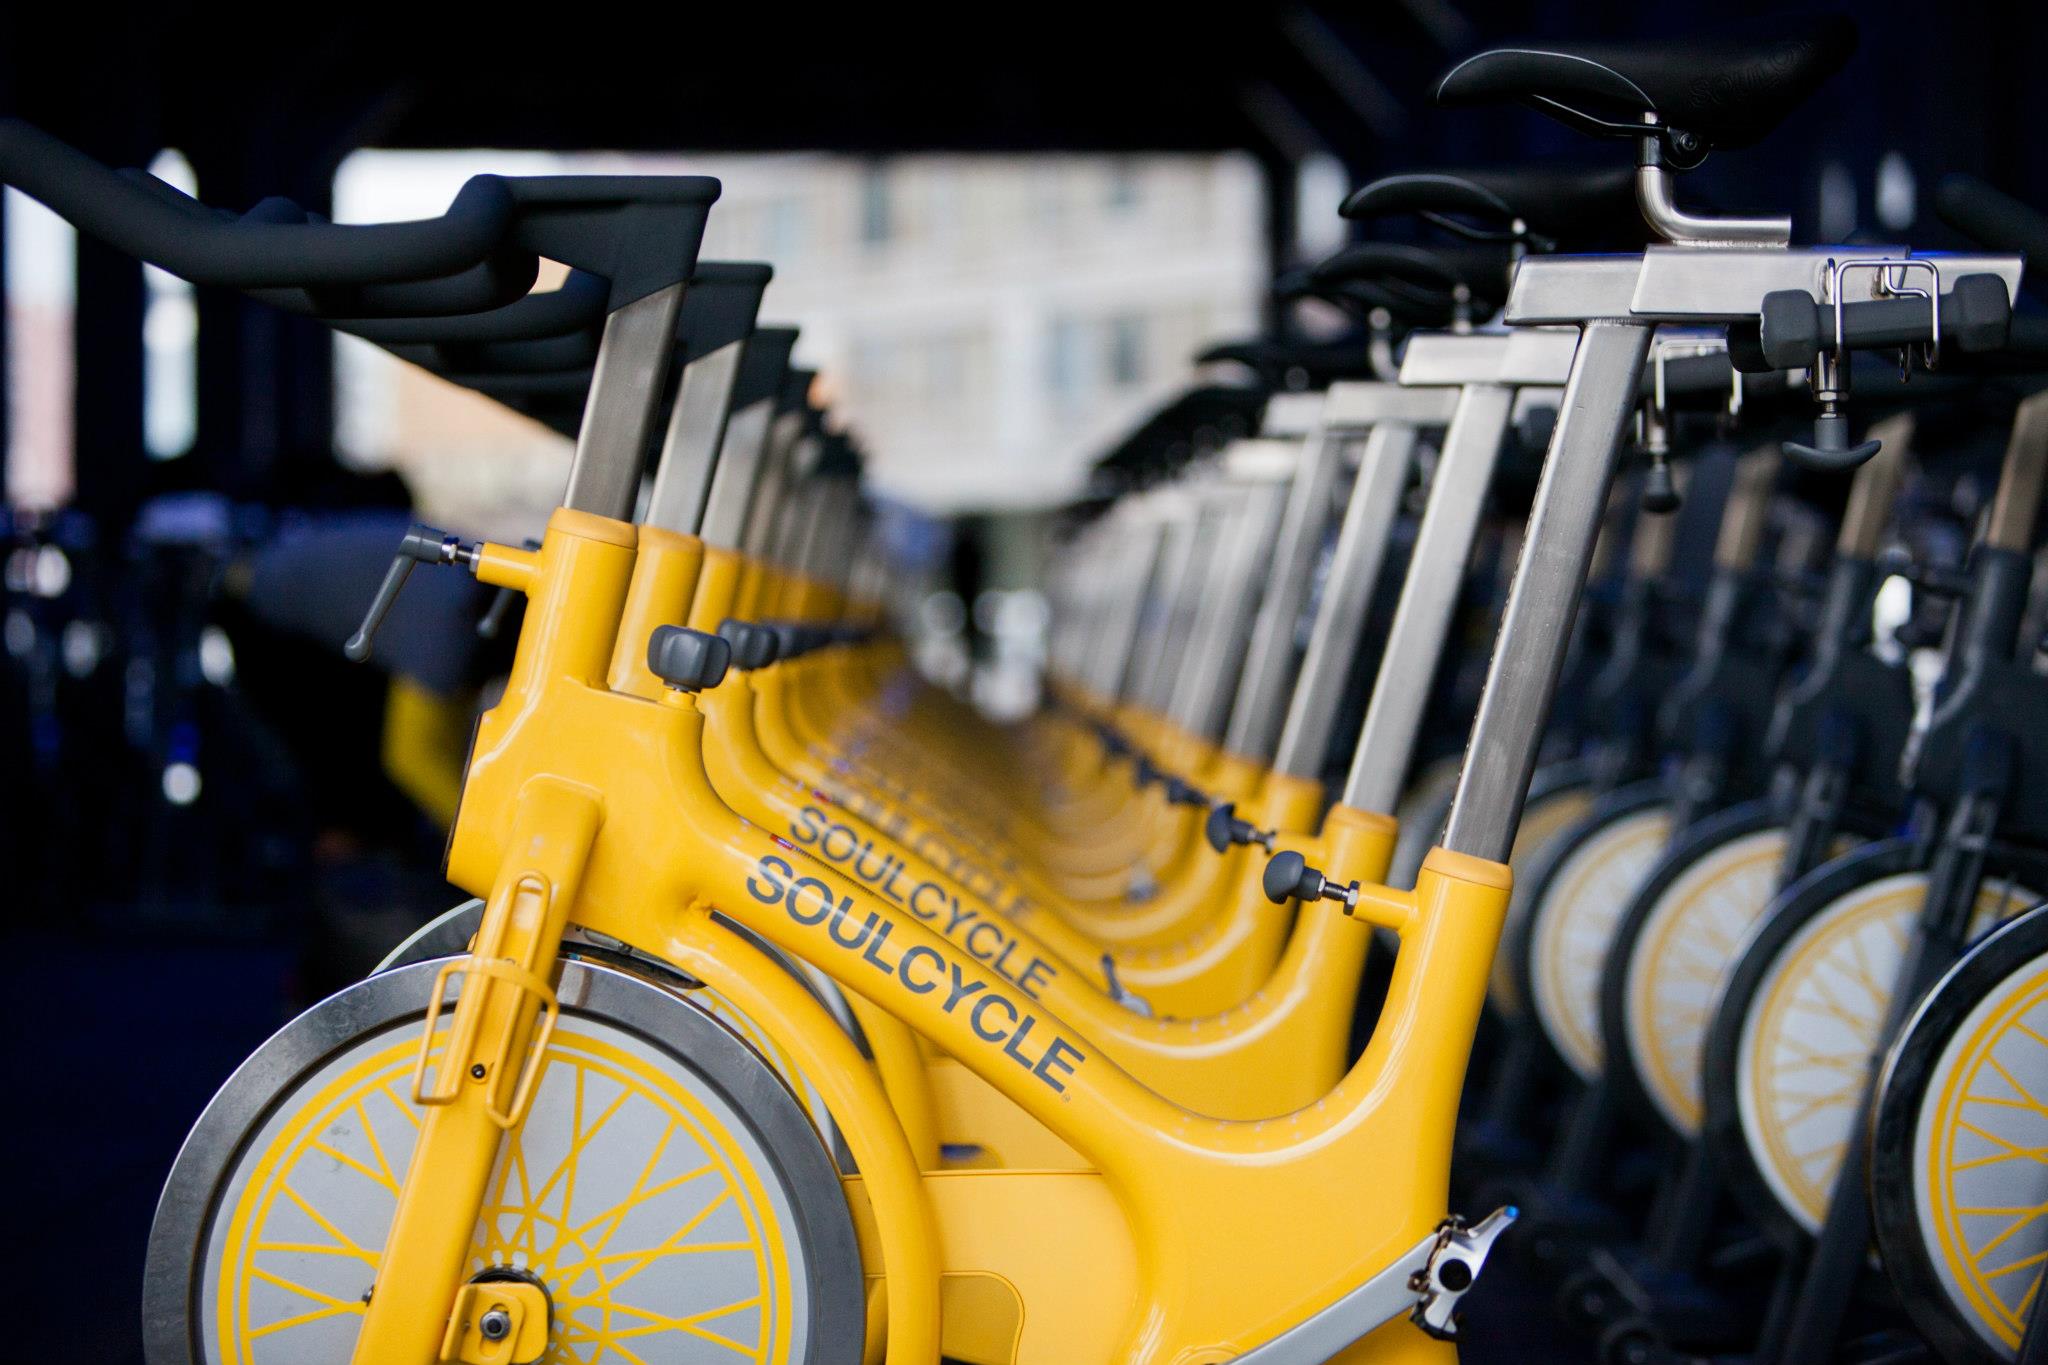 SoulCycle1